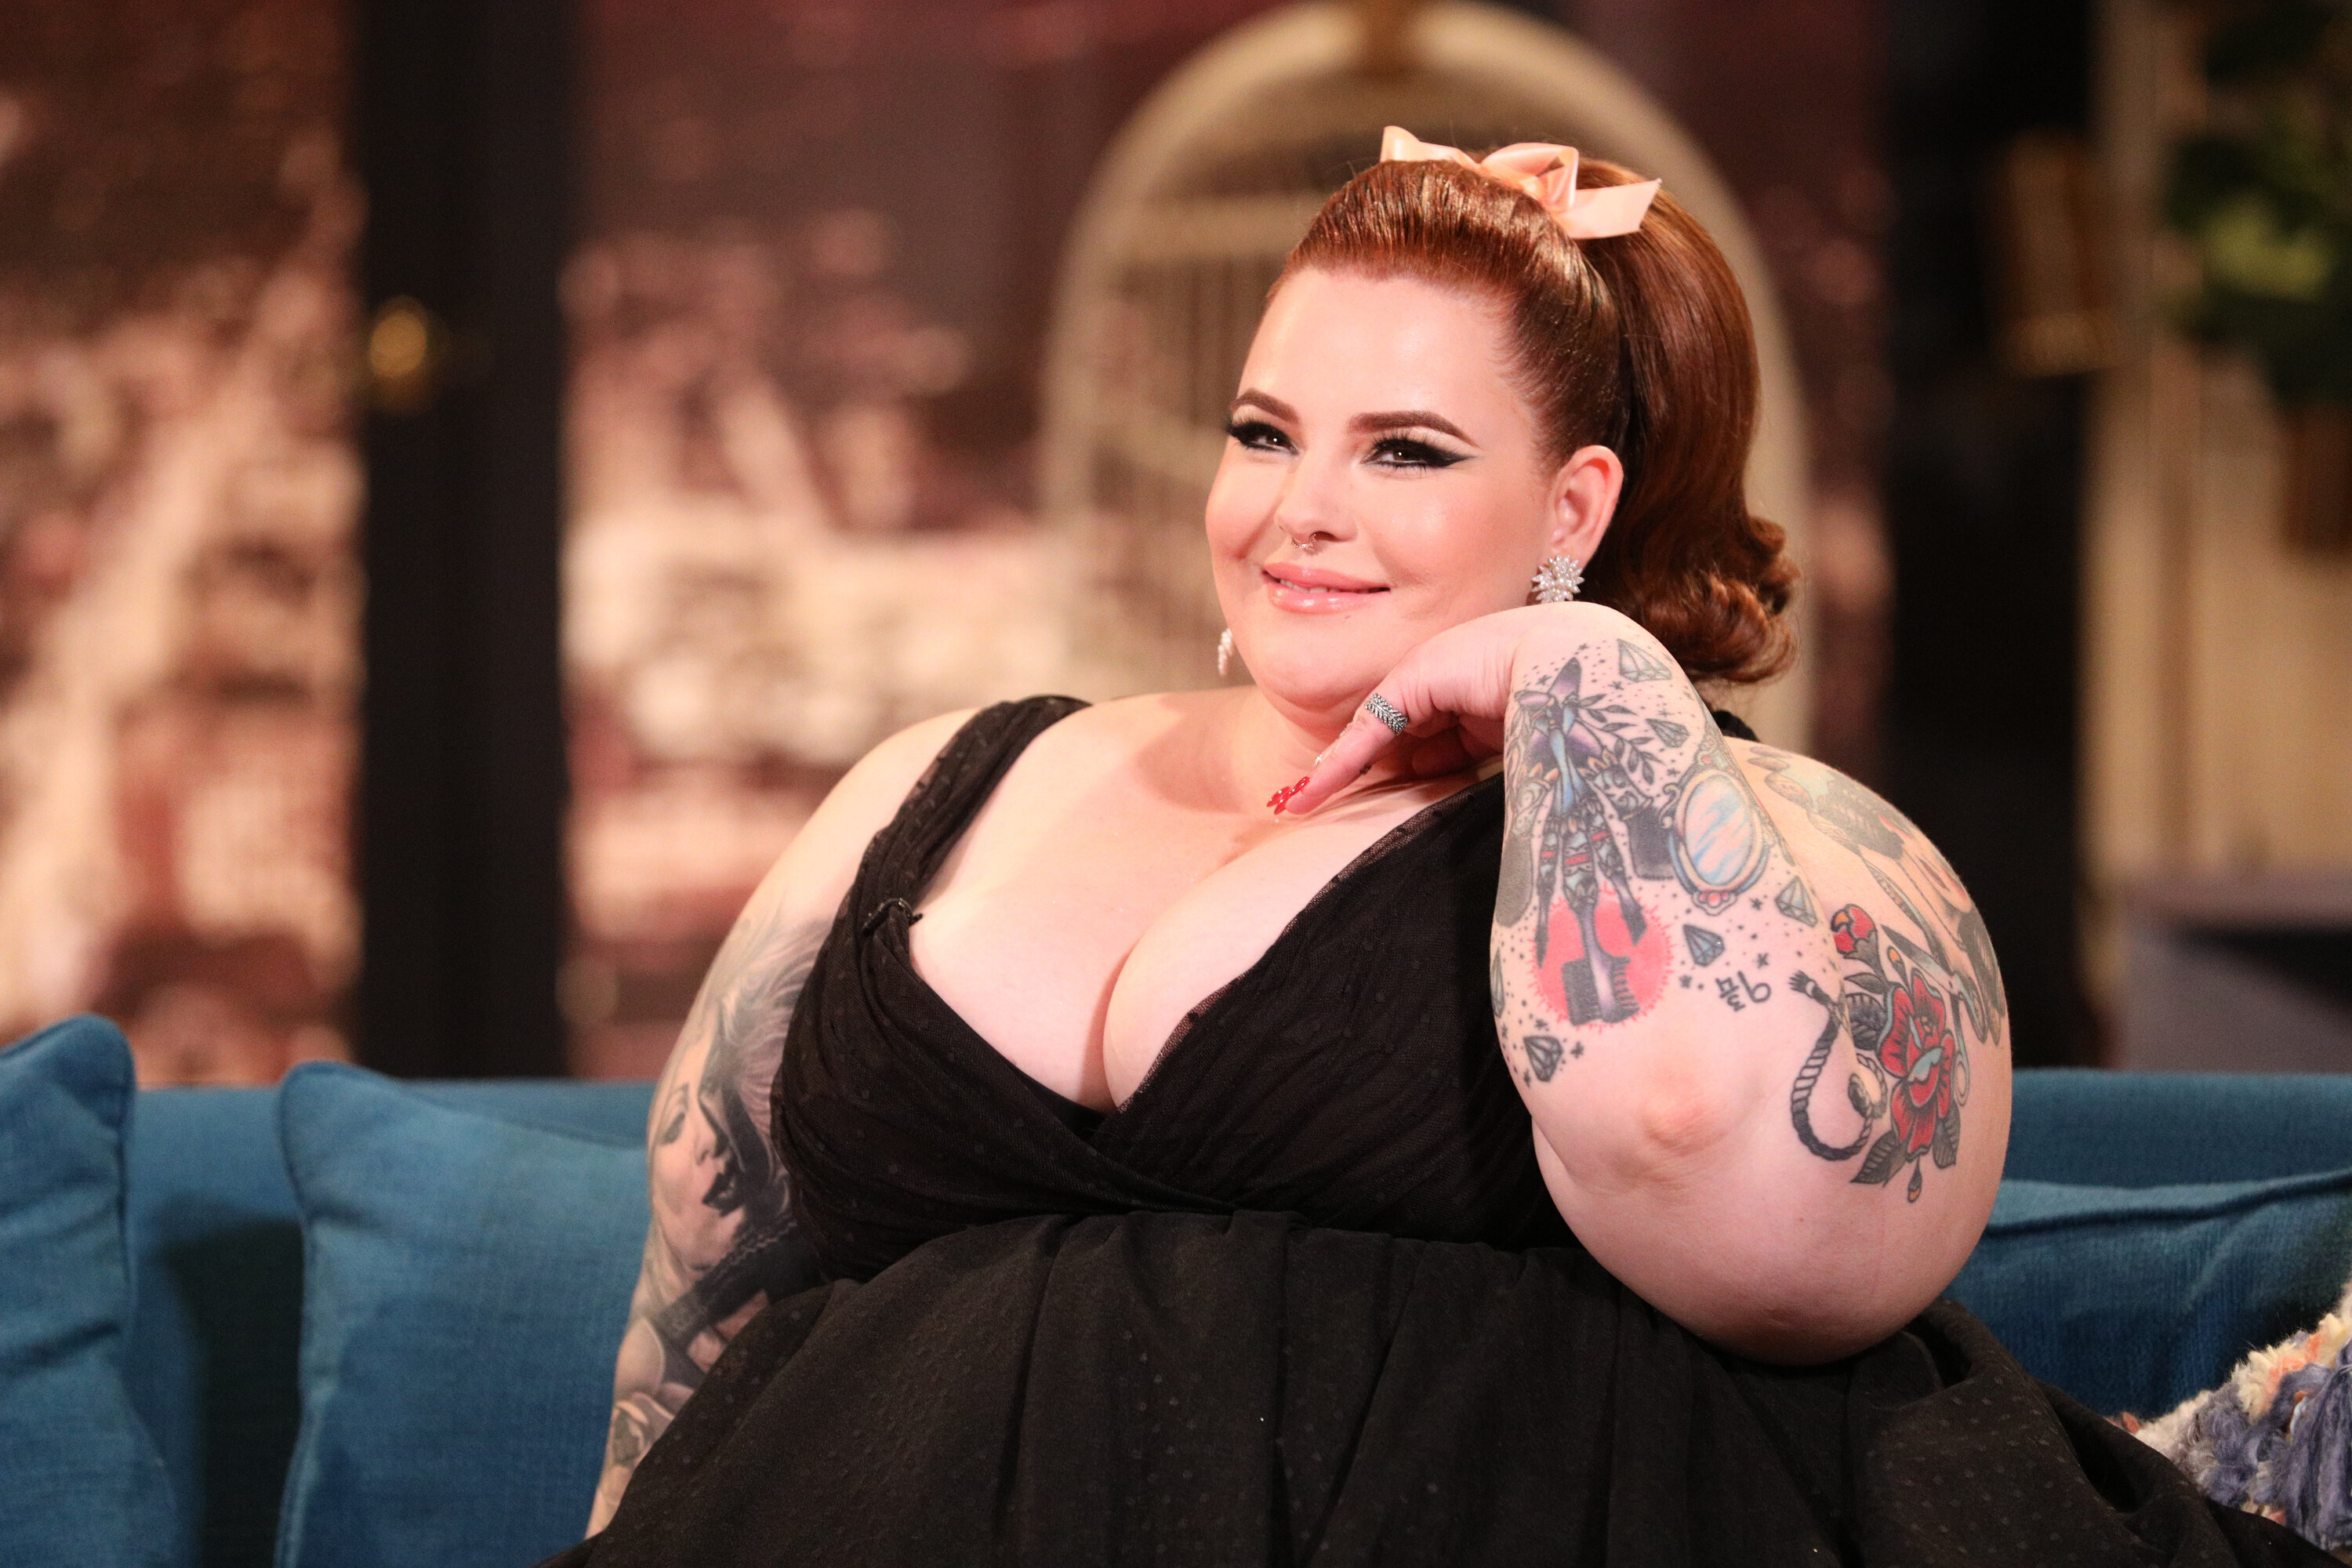 Like Tess Holliday, Im Fat And I Just Want To Live My Damn Life HuffPost HuffPost Personal image picture